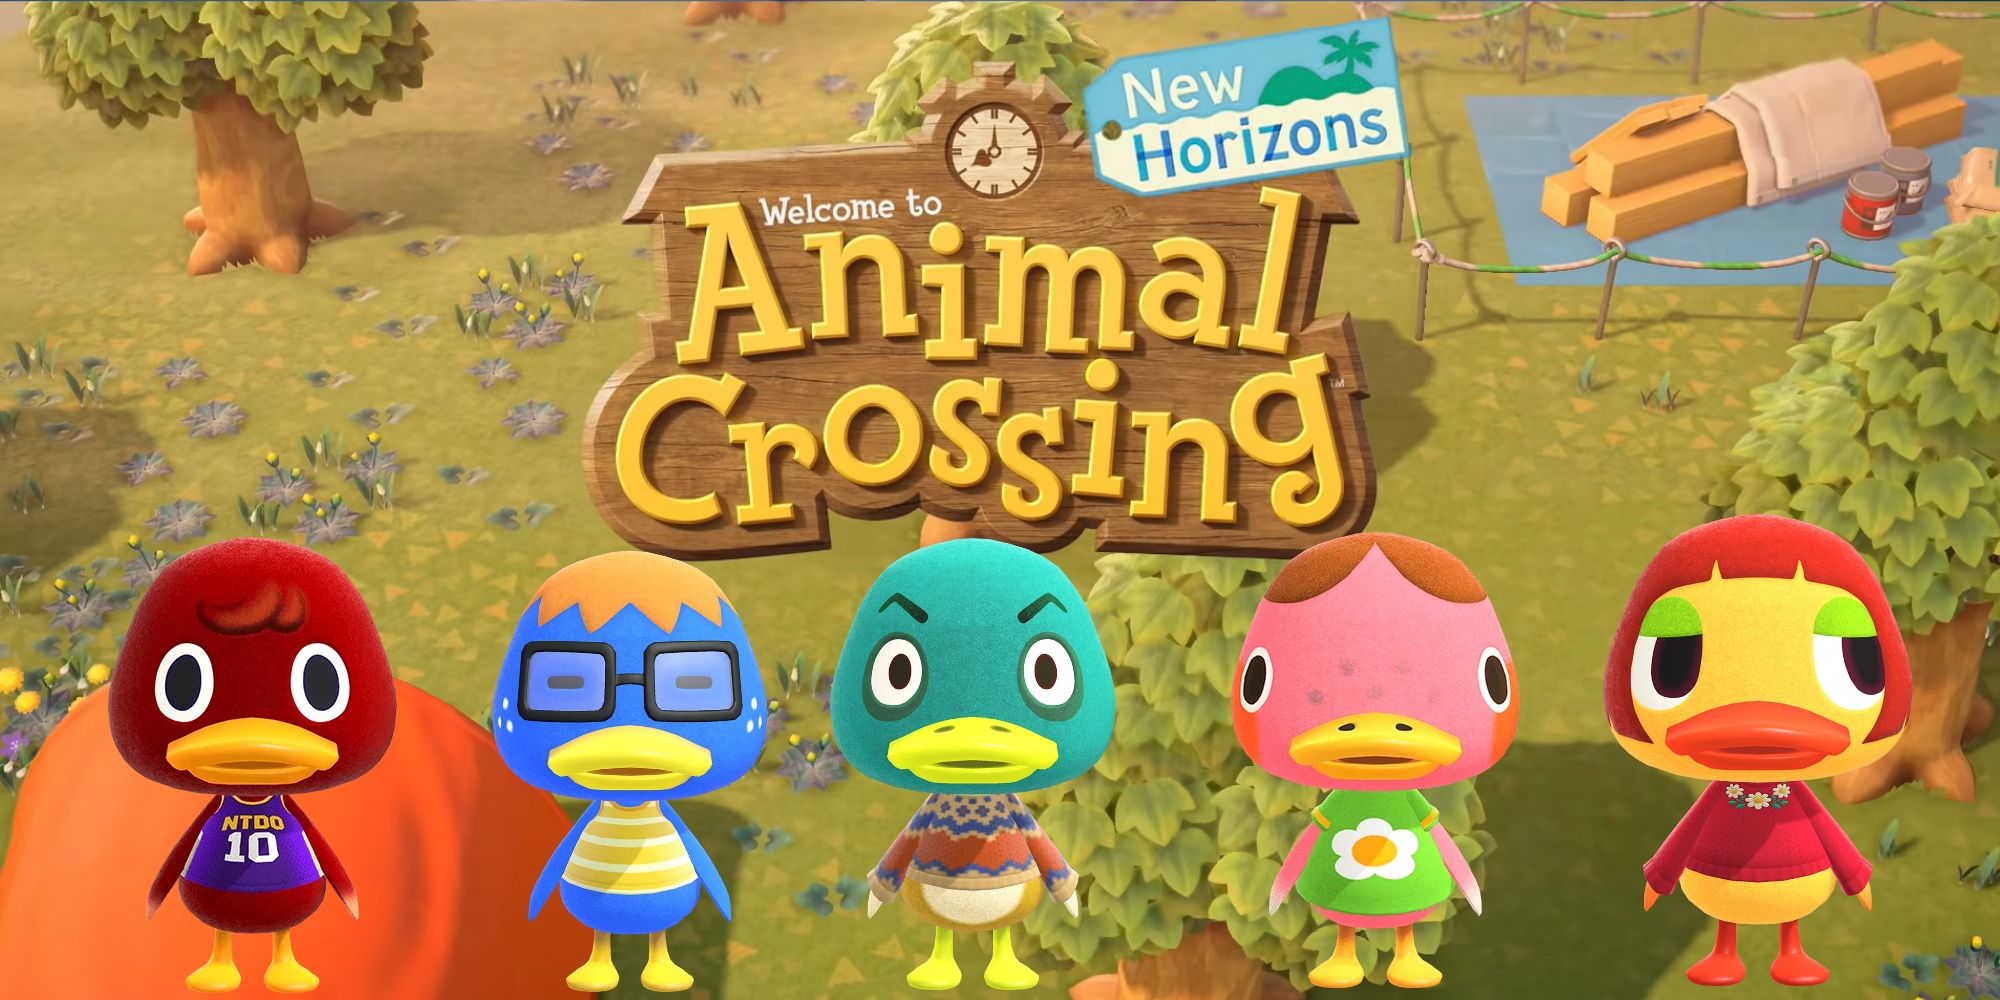 Animal Crossing title screen with multiple ducks superimposed over it